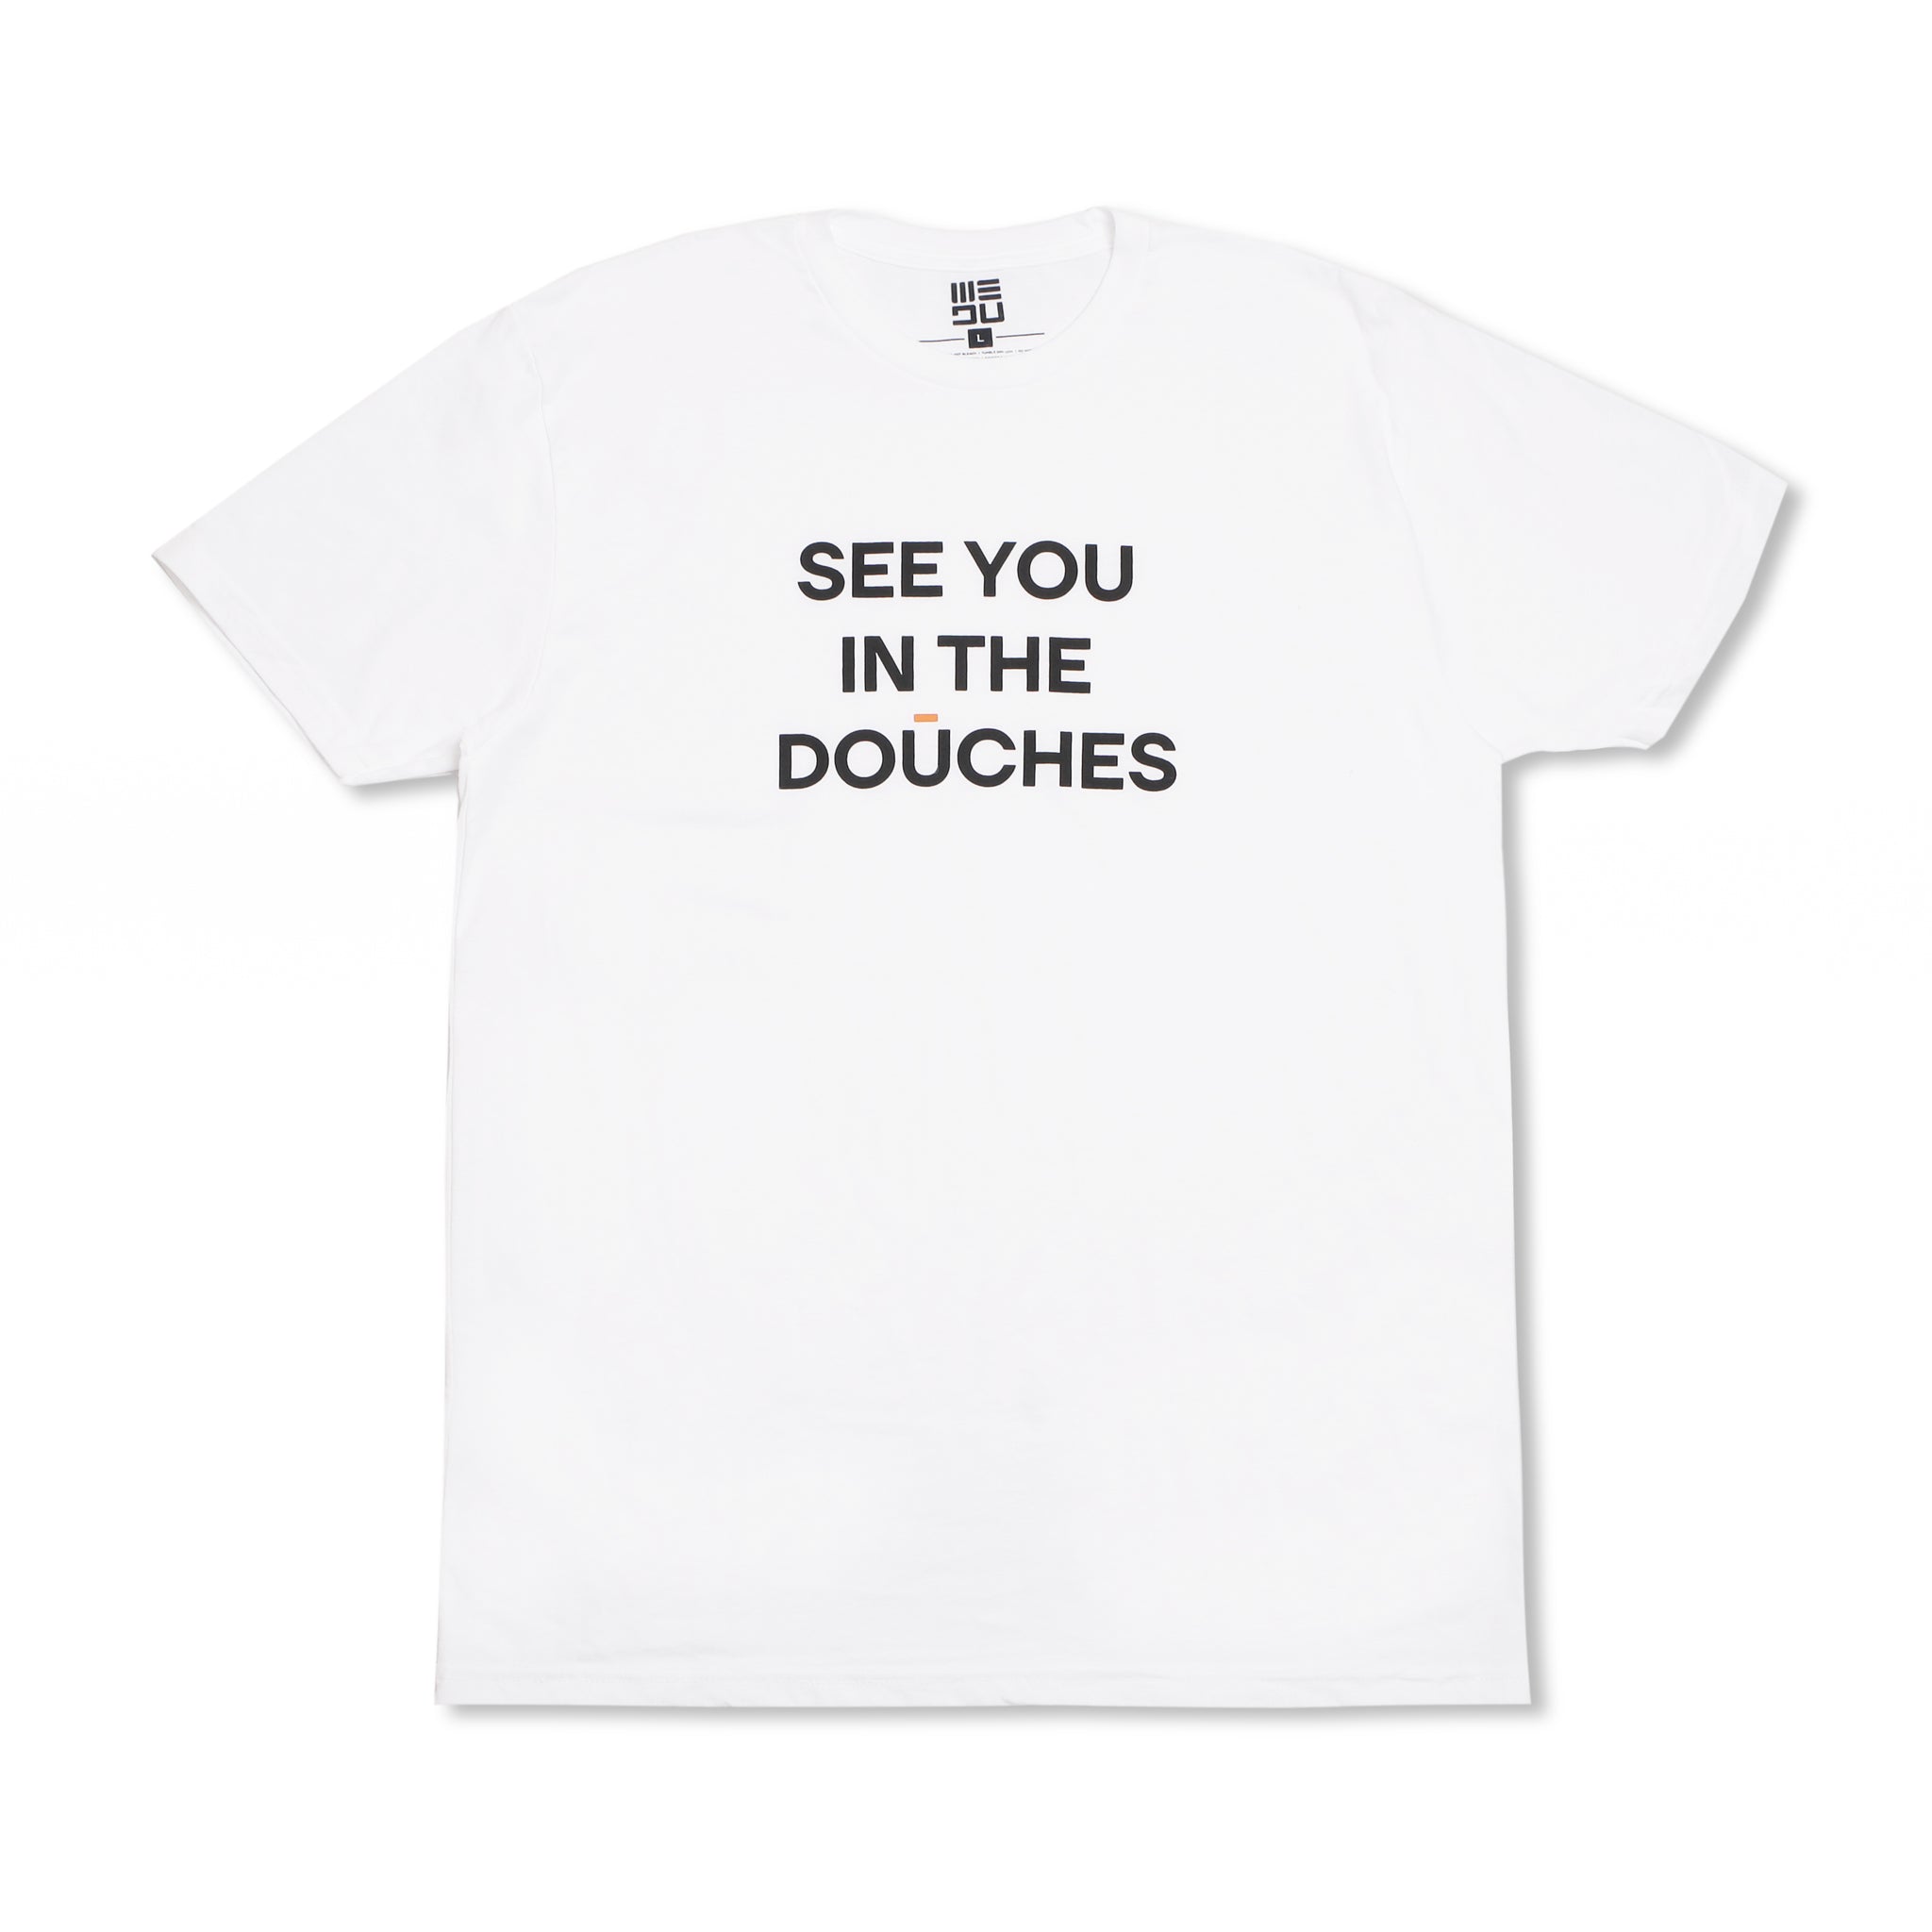 SEE YOU IN THE DOŪCHES Tee